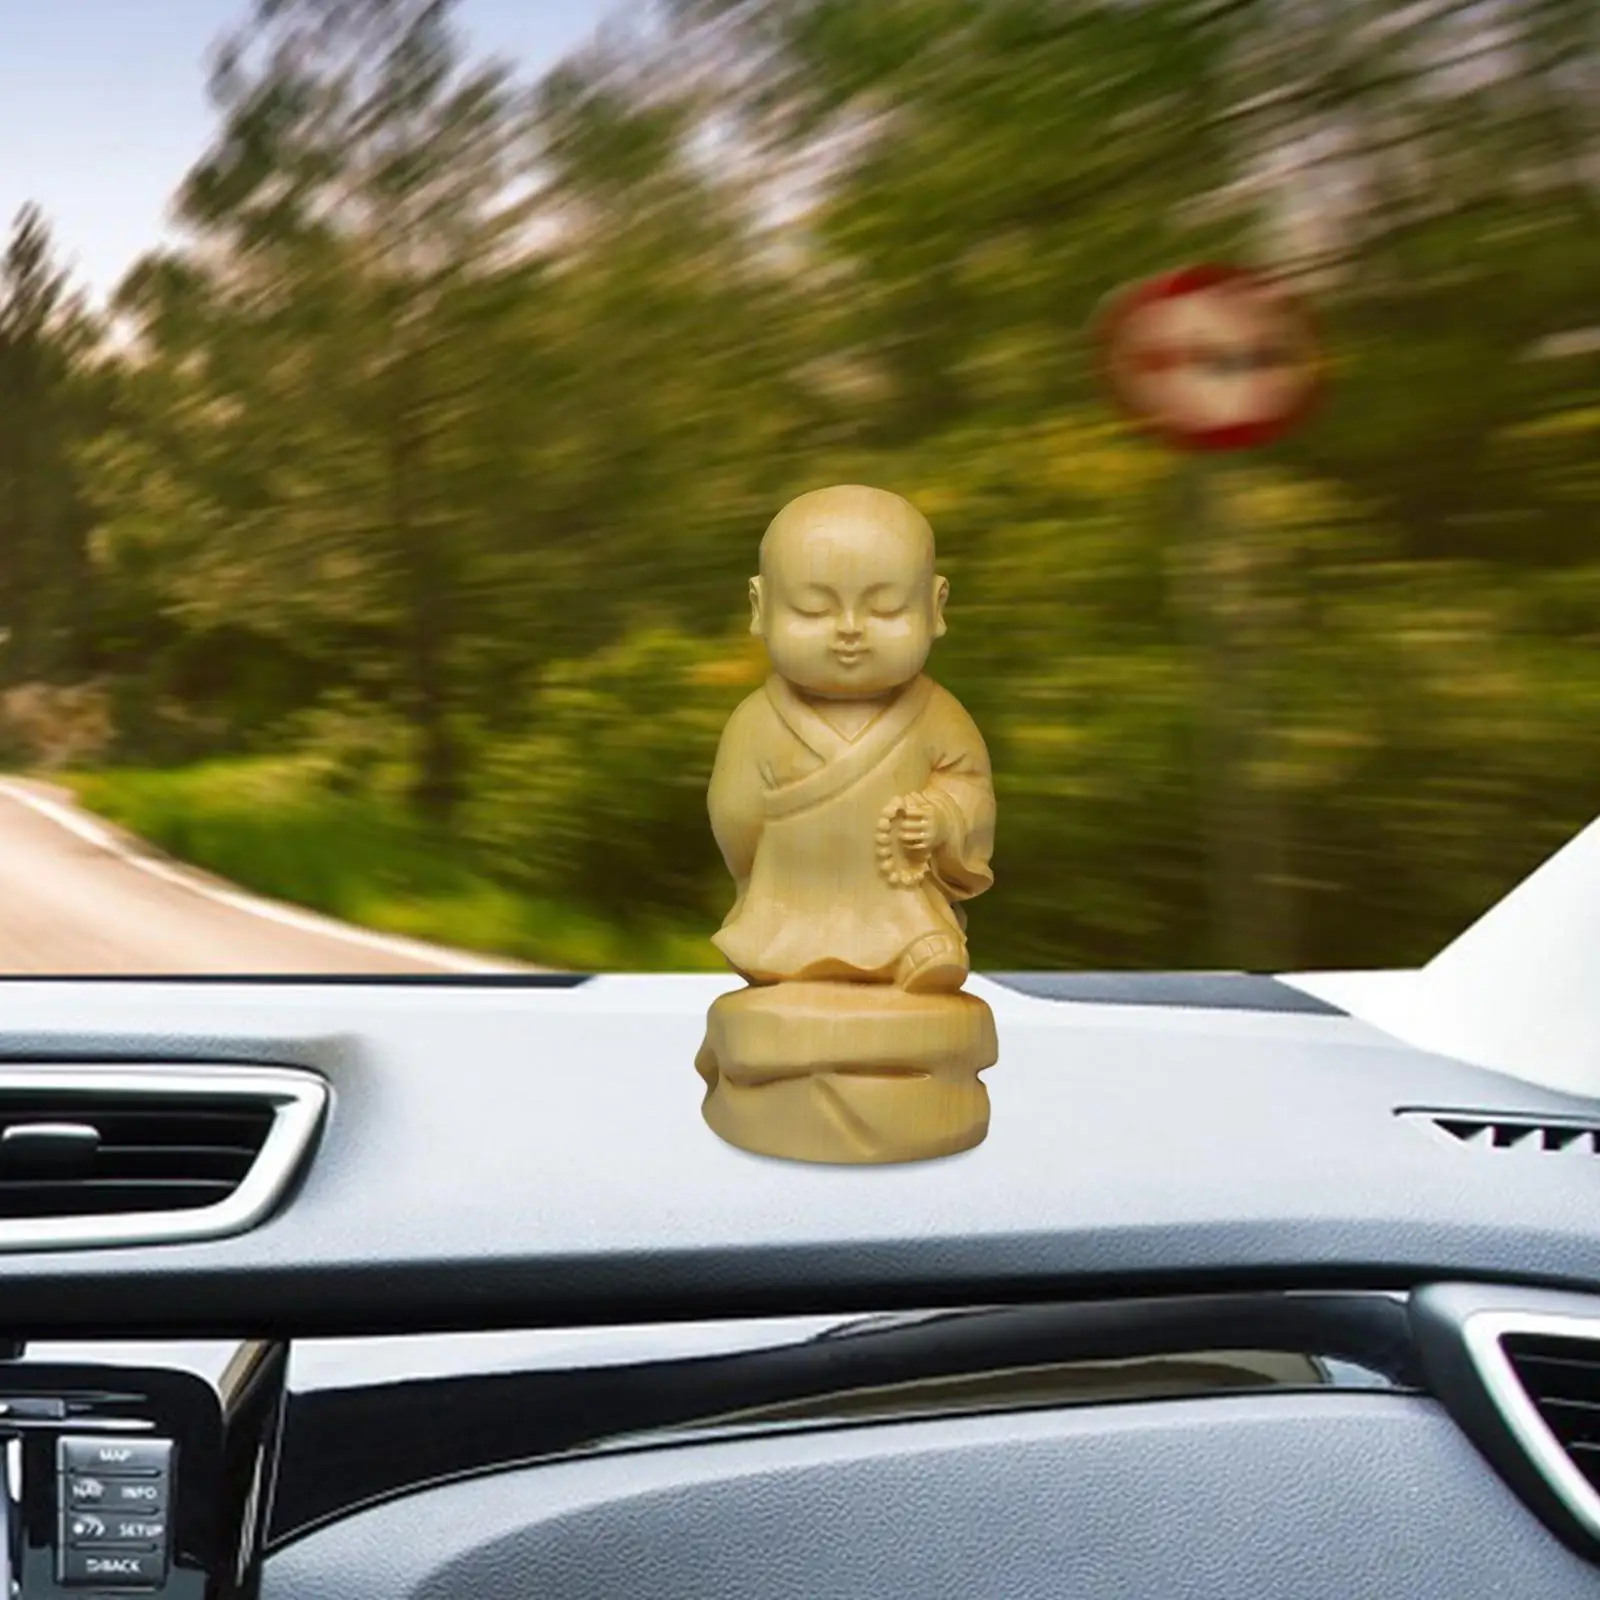 Chinese Dashboard Figurine Sculptures Tabletop Decor Figures Buddha Miniature Traditional Standing Monk Statue